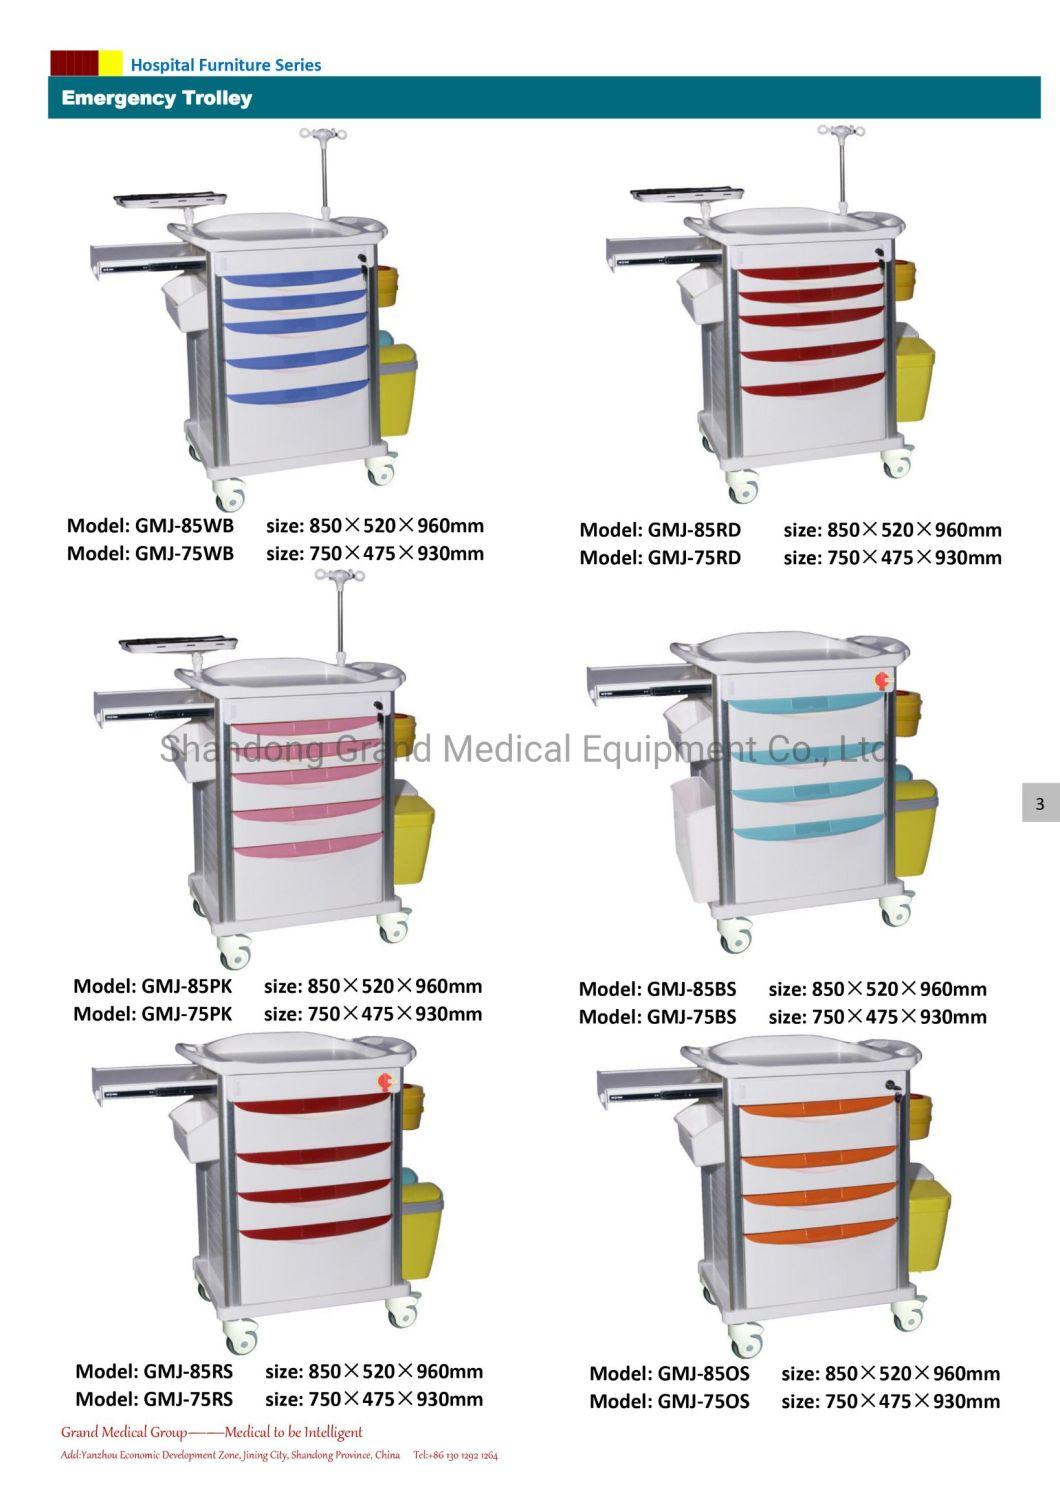 China Modern Design Mobile Cutomized Medical Trolley Medical Emergency Hospital Cart ABS Material with Casters Hospital Furniture in Stock